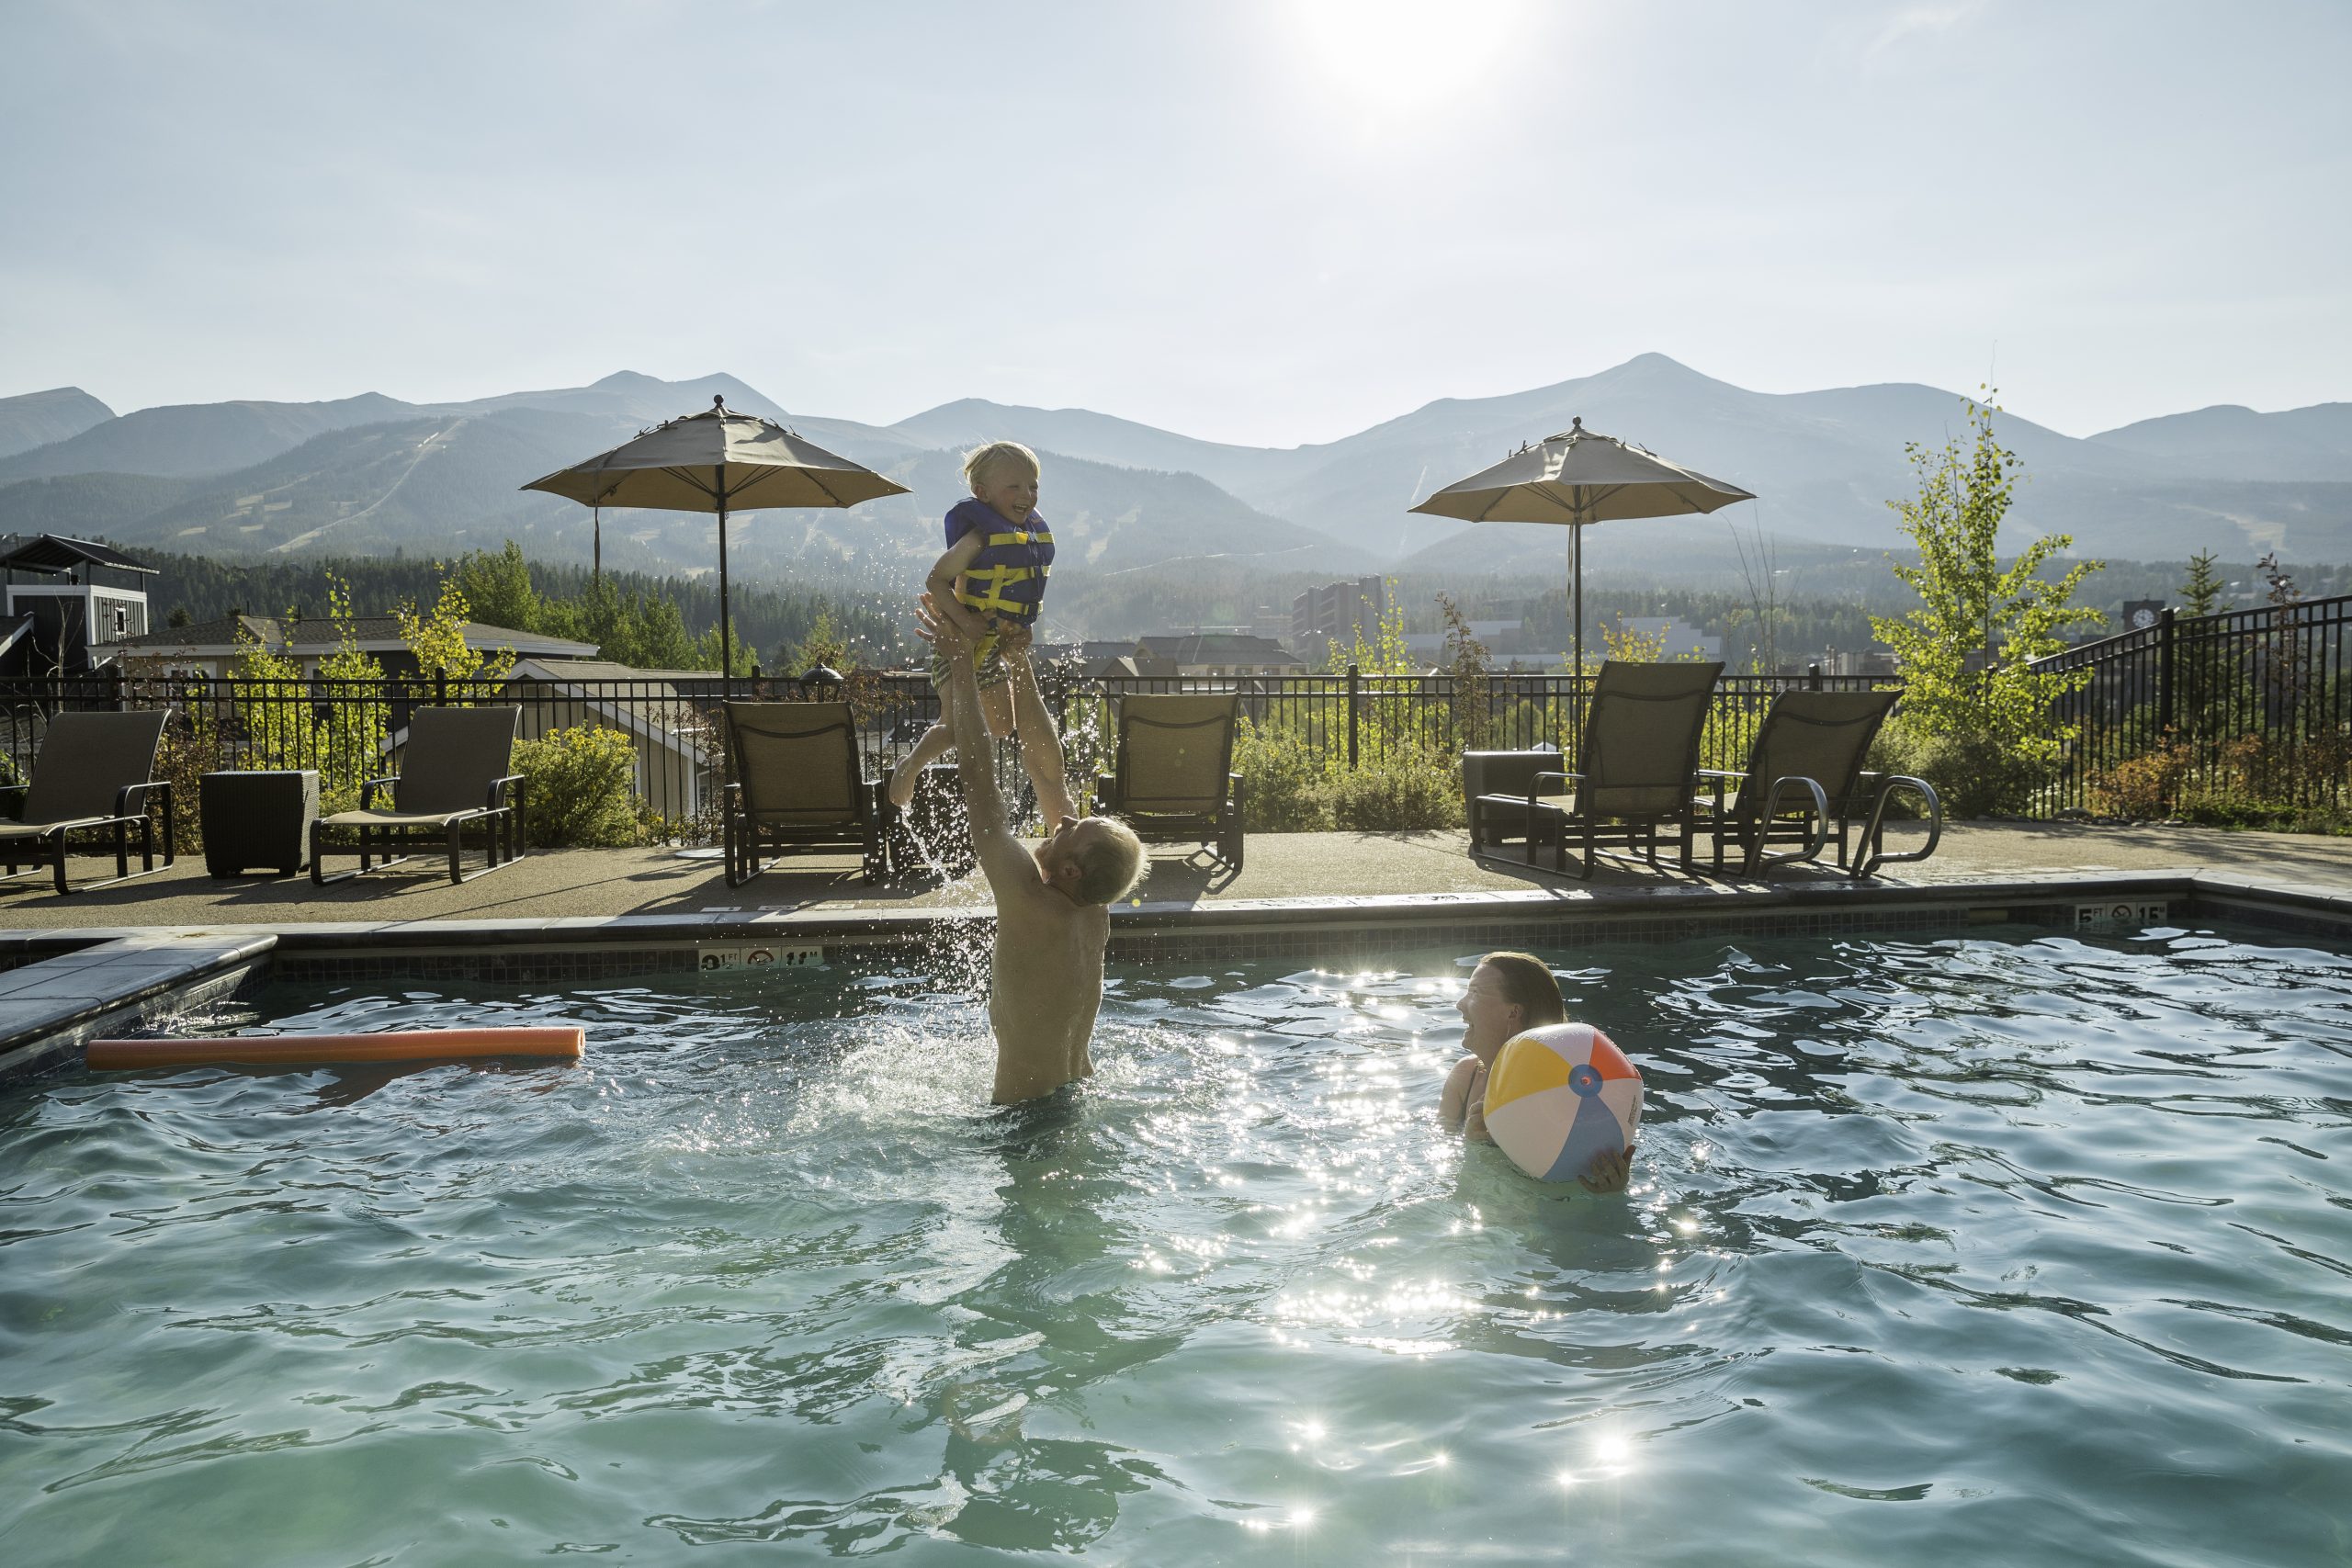 family playing in pool with mountains in background